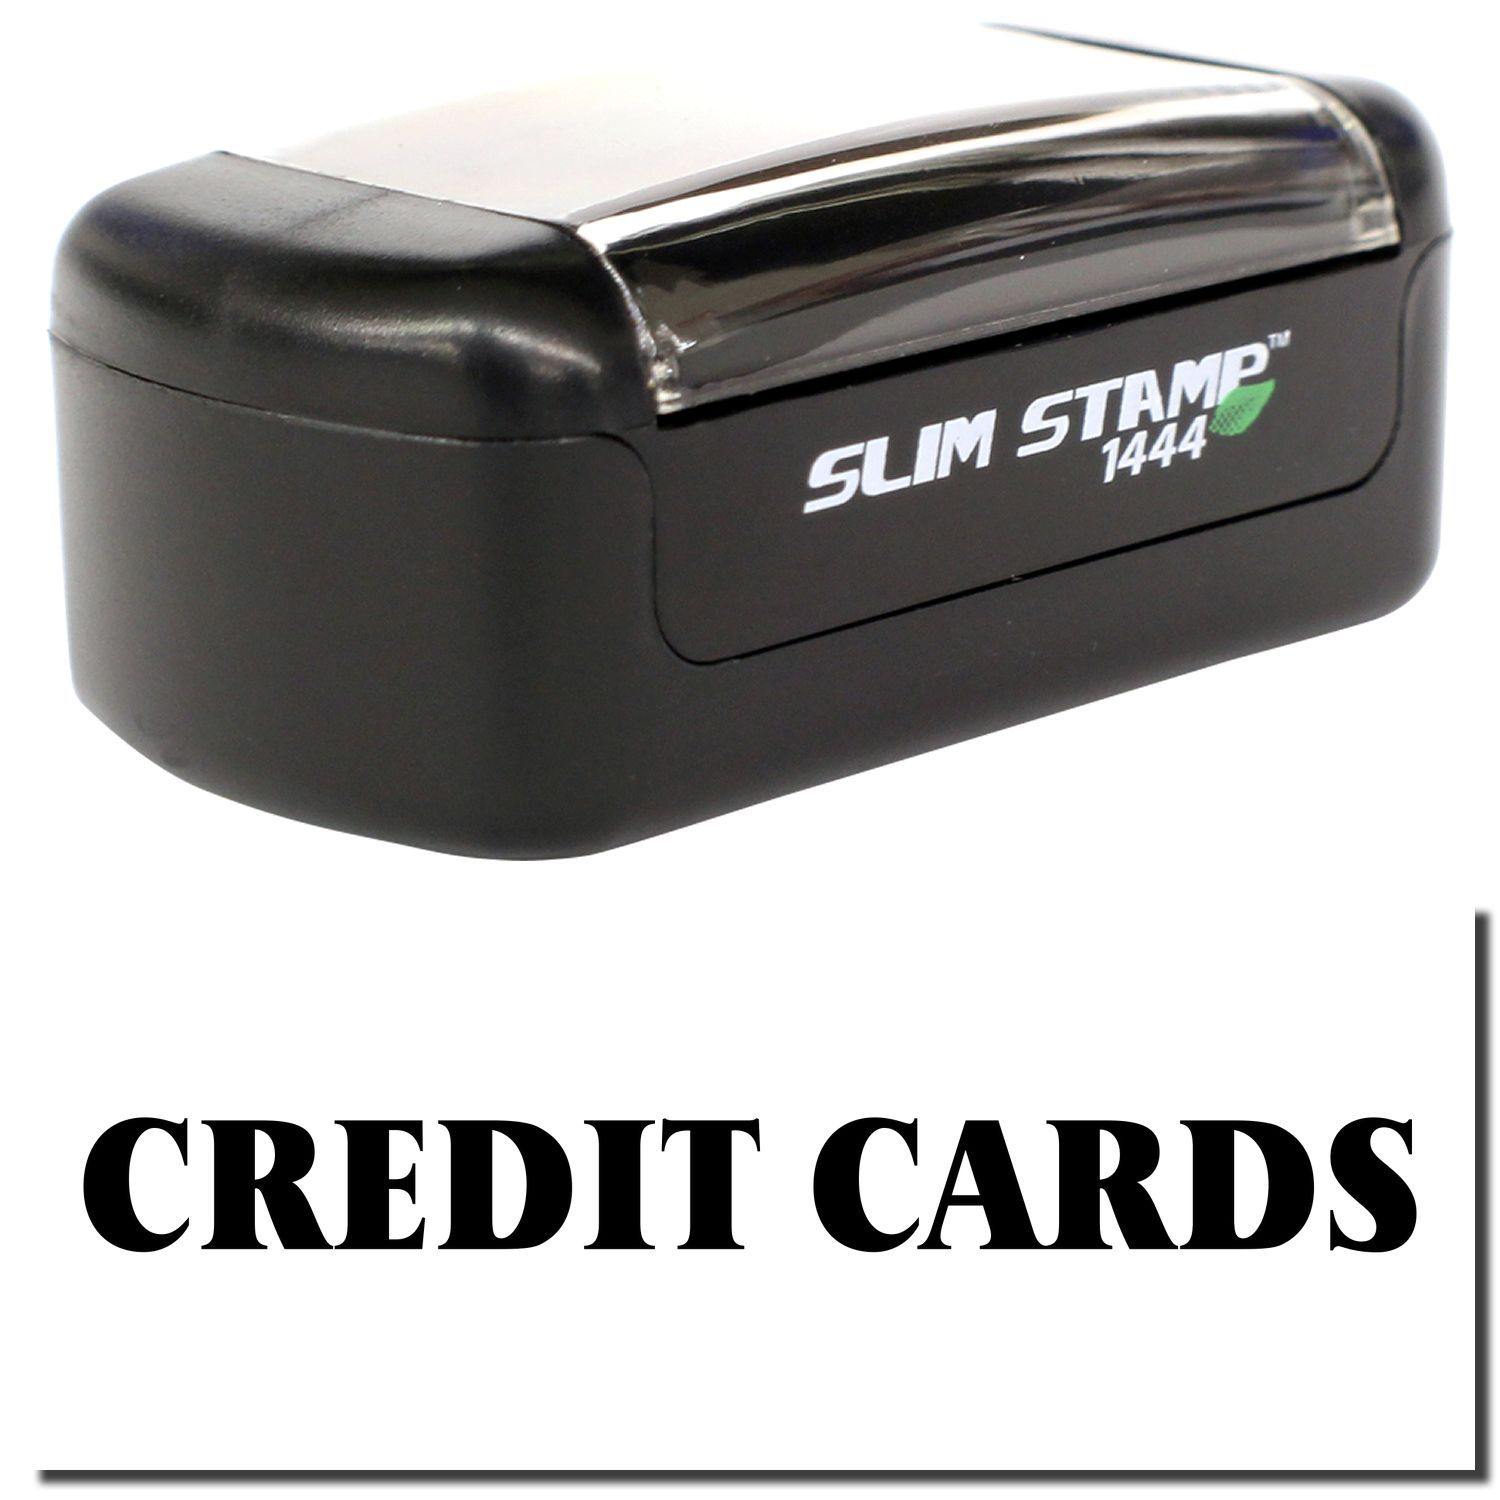 A stock office pre-inked stamp with a stamped image showing how the text "CREDIT CARDS" is displayed after stamping.